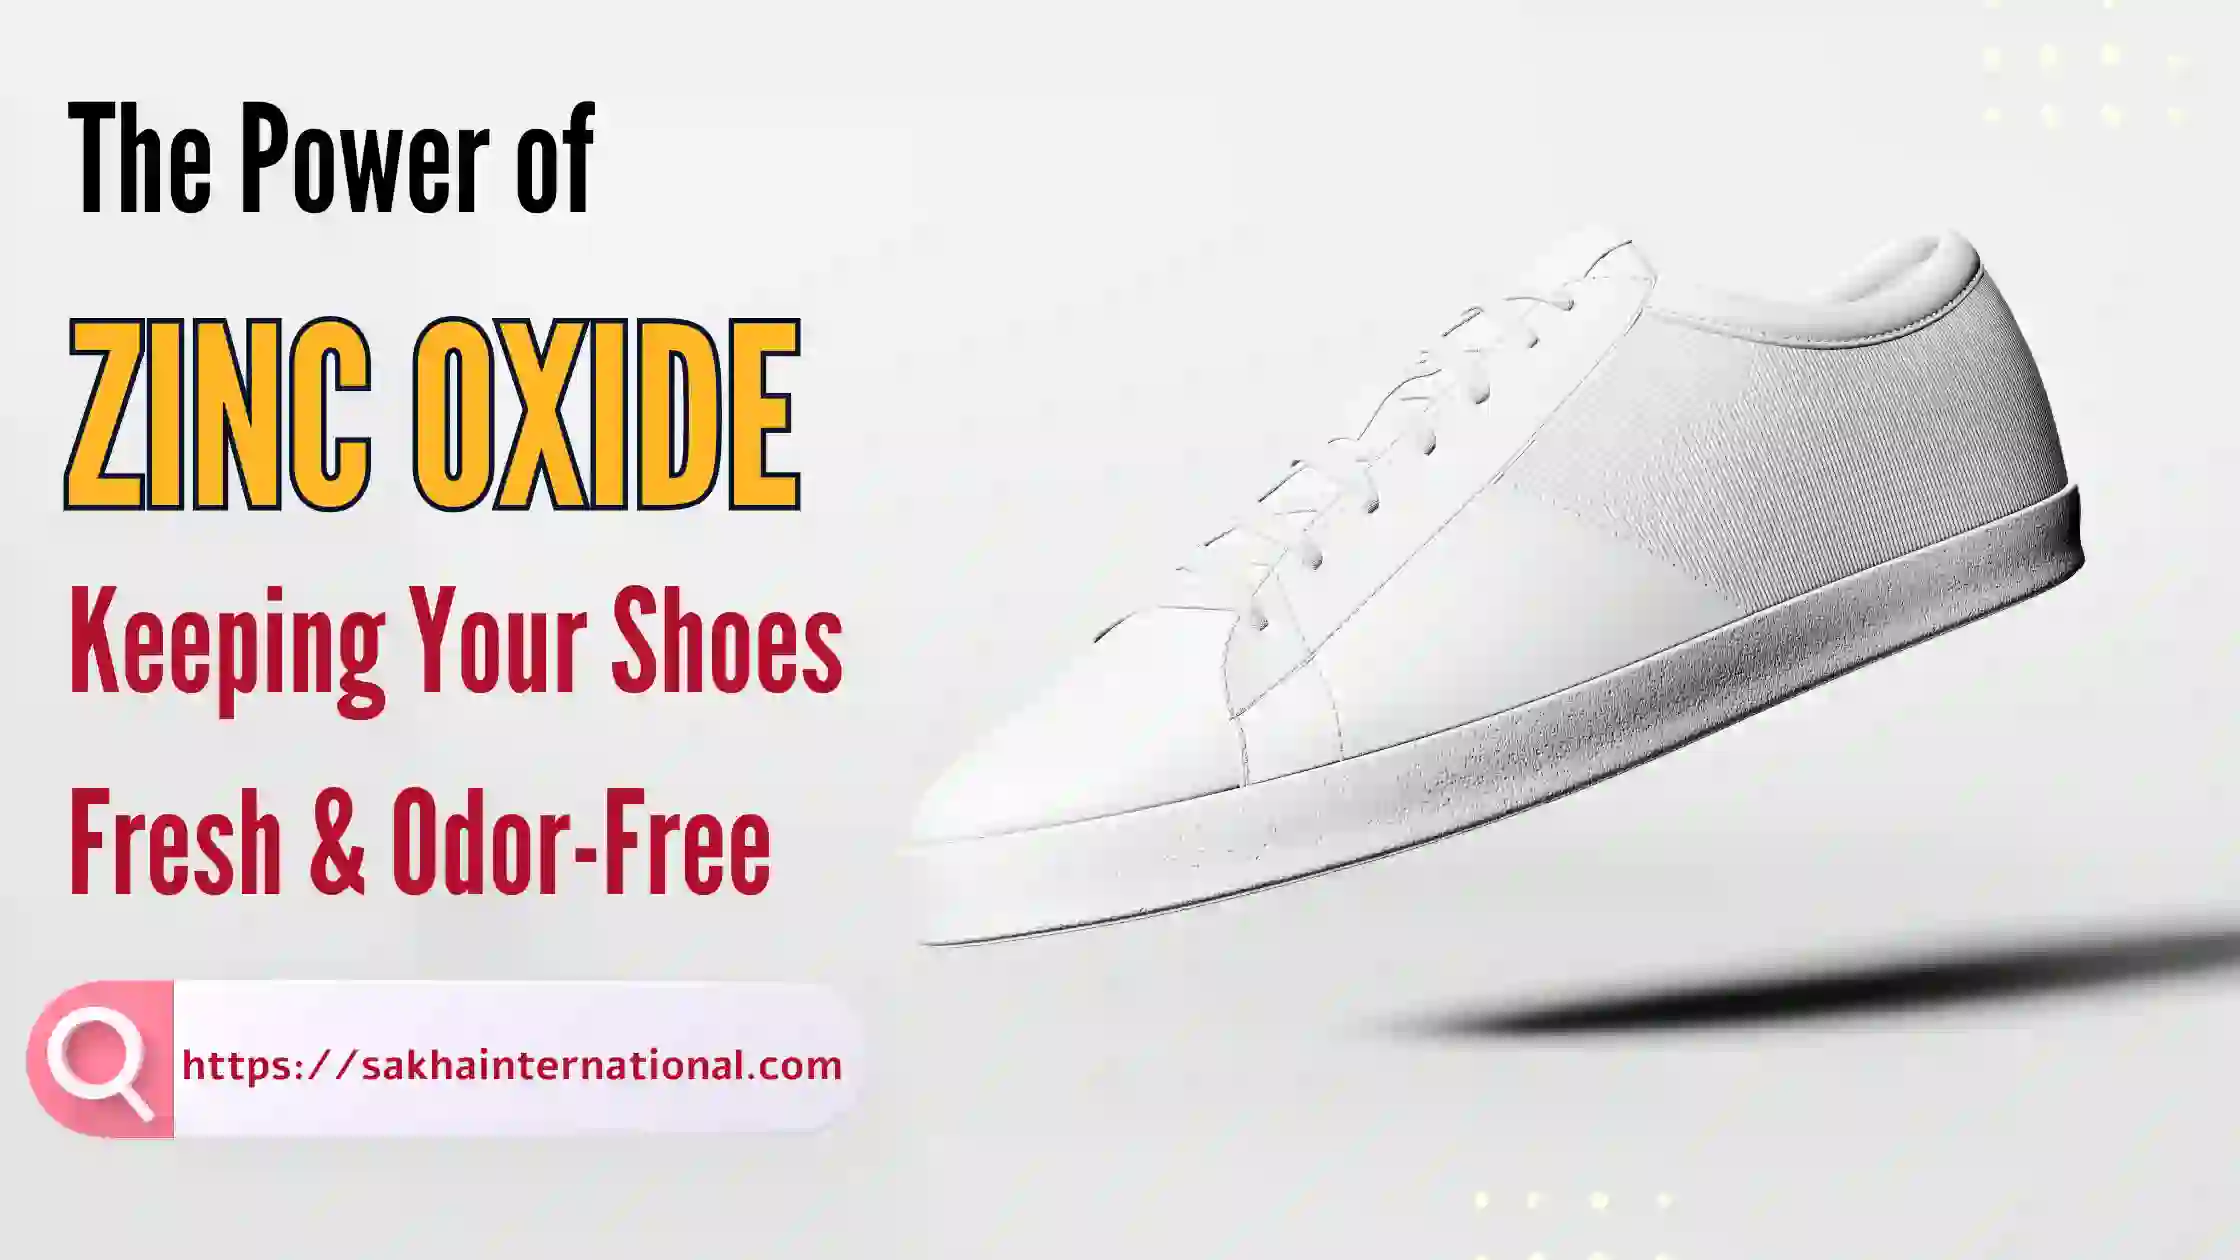 The Power of Zinc Oxide Keeping Your Shoes Fresh and Odor-Free